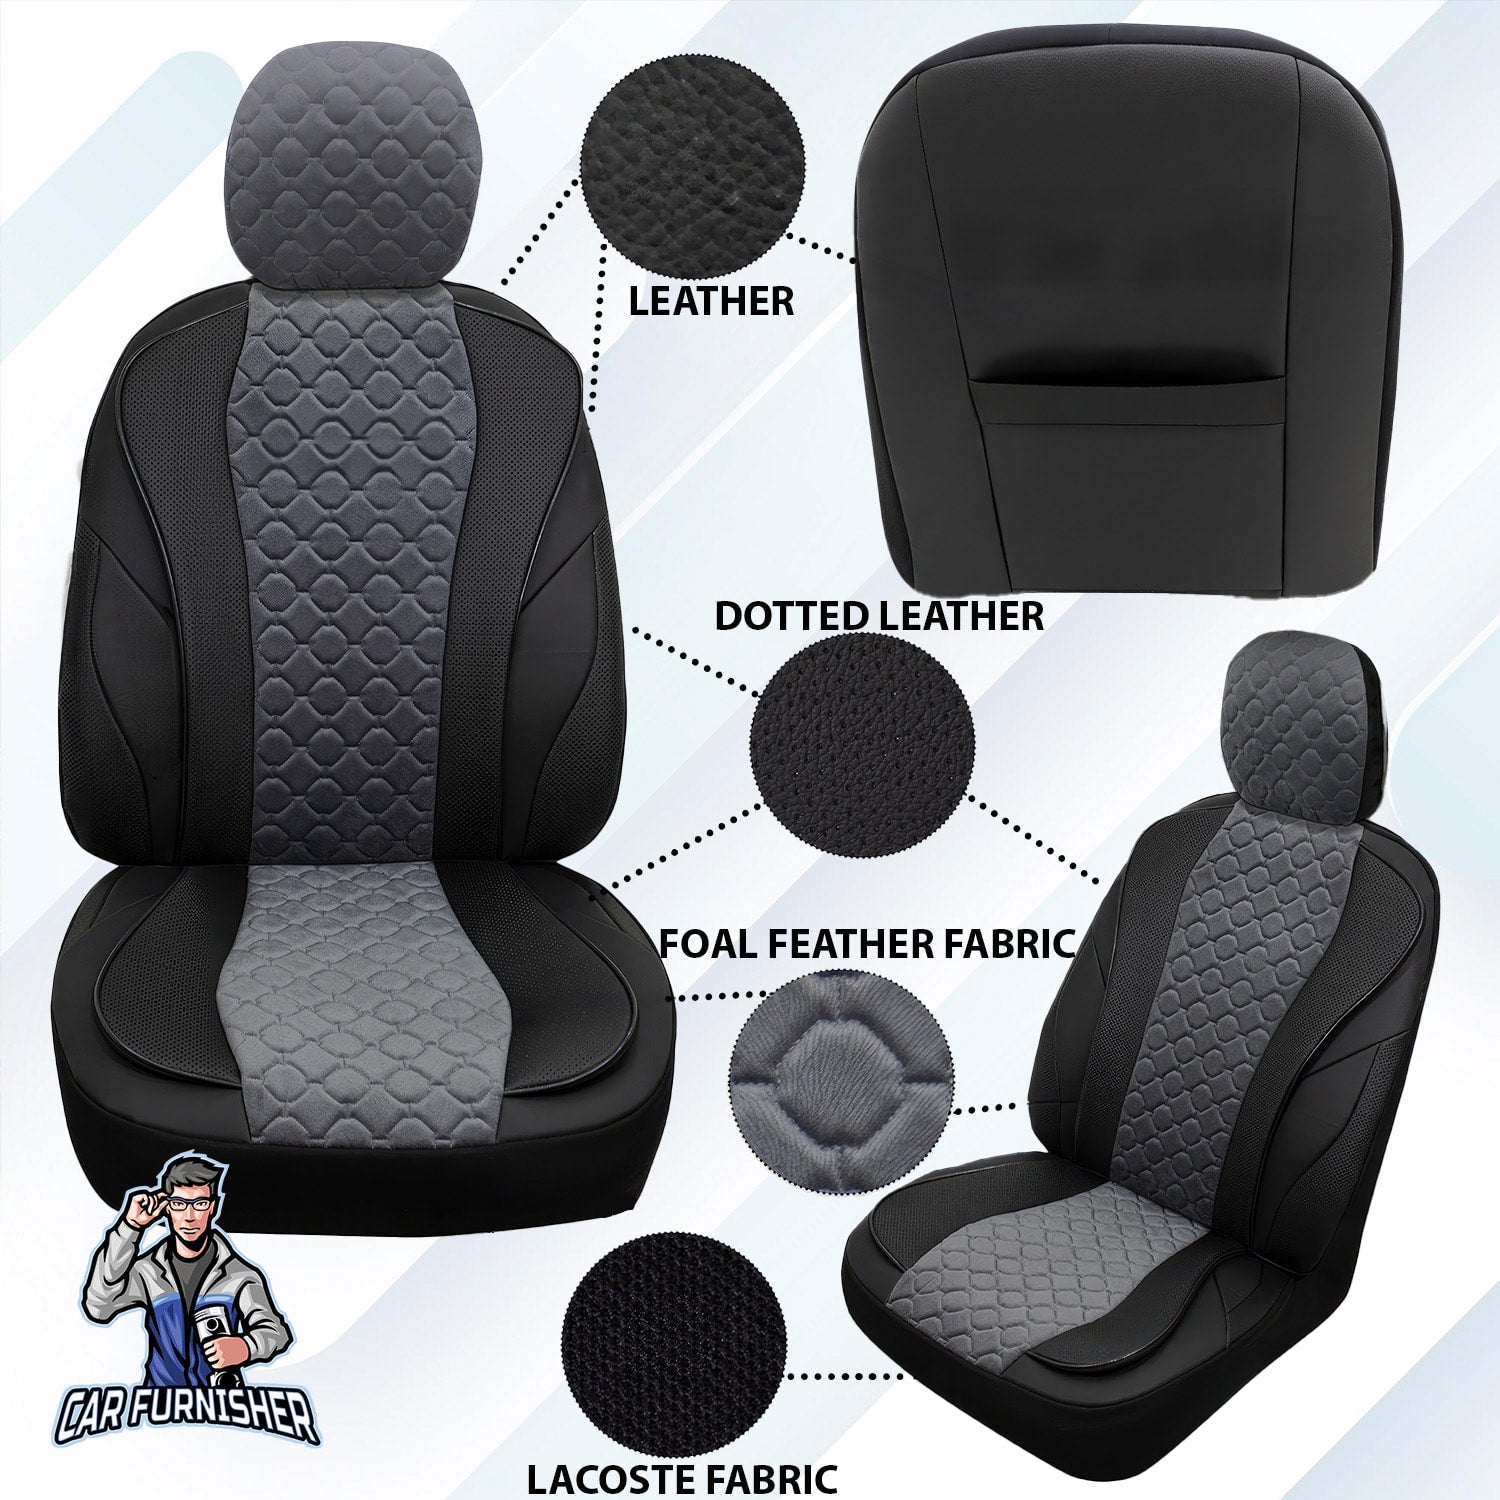 Mercedes 190 Seat Covers VIP Design Gray 5 Seats + Headrests (Full Set) Leather & Foal Feather Fabric